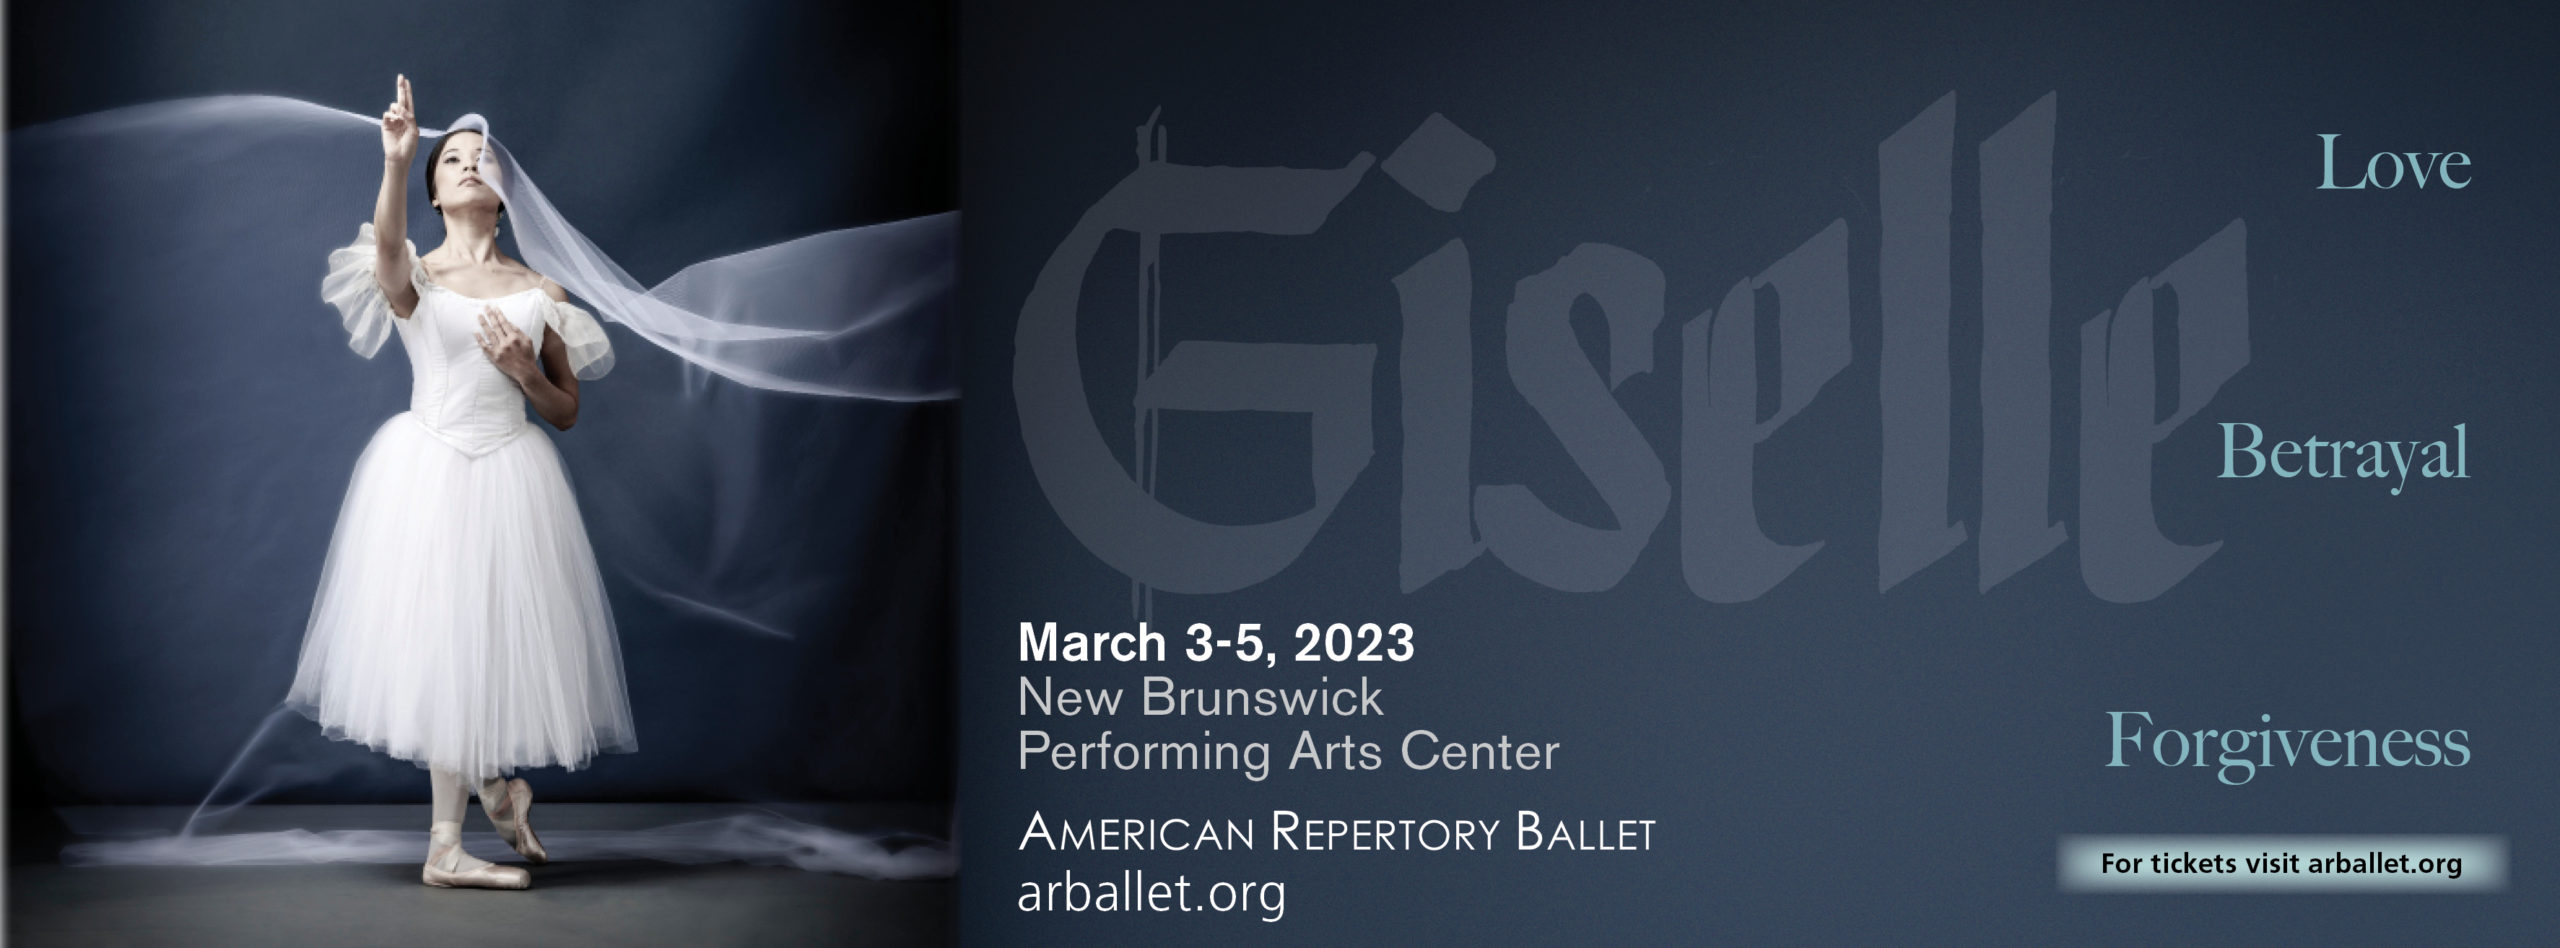 ETHAN STIEFEL BRINGS INTERNATIONALLY ACCLAIMED PRODUCTION OF GISELLE TO AMERICAN REPERTORY BALLET